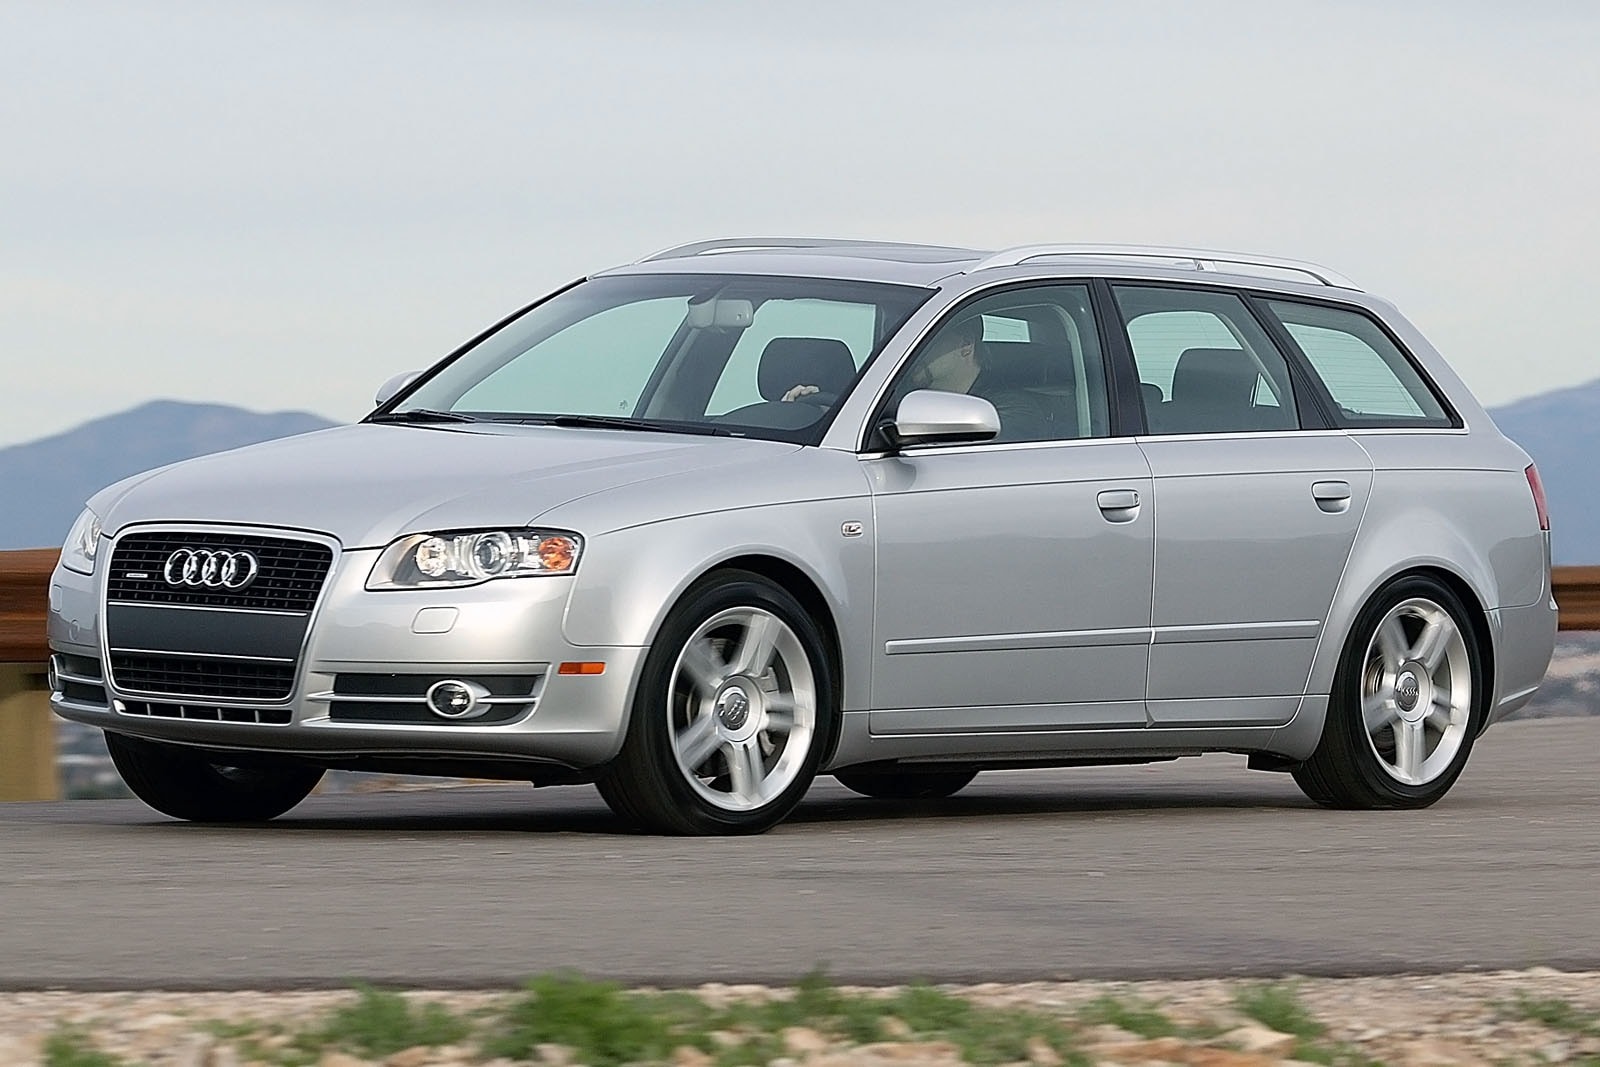 Used 2007 Audi A4 Wagon Review | Edmunds